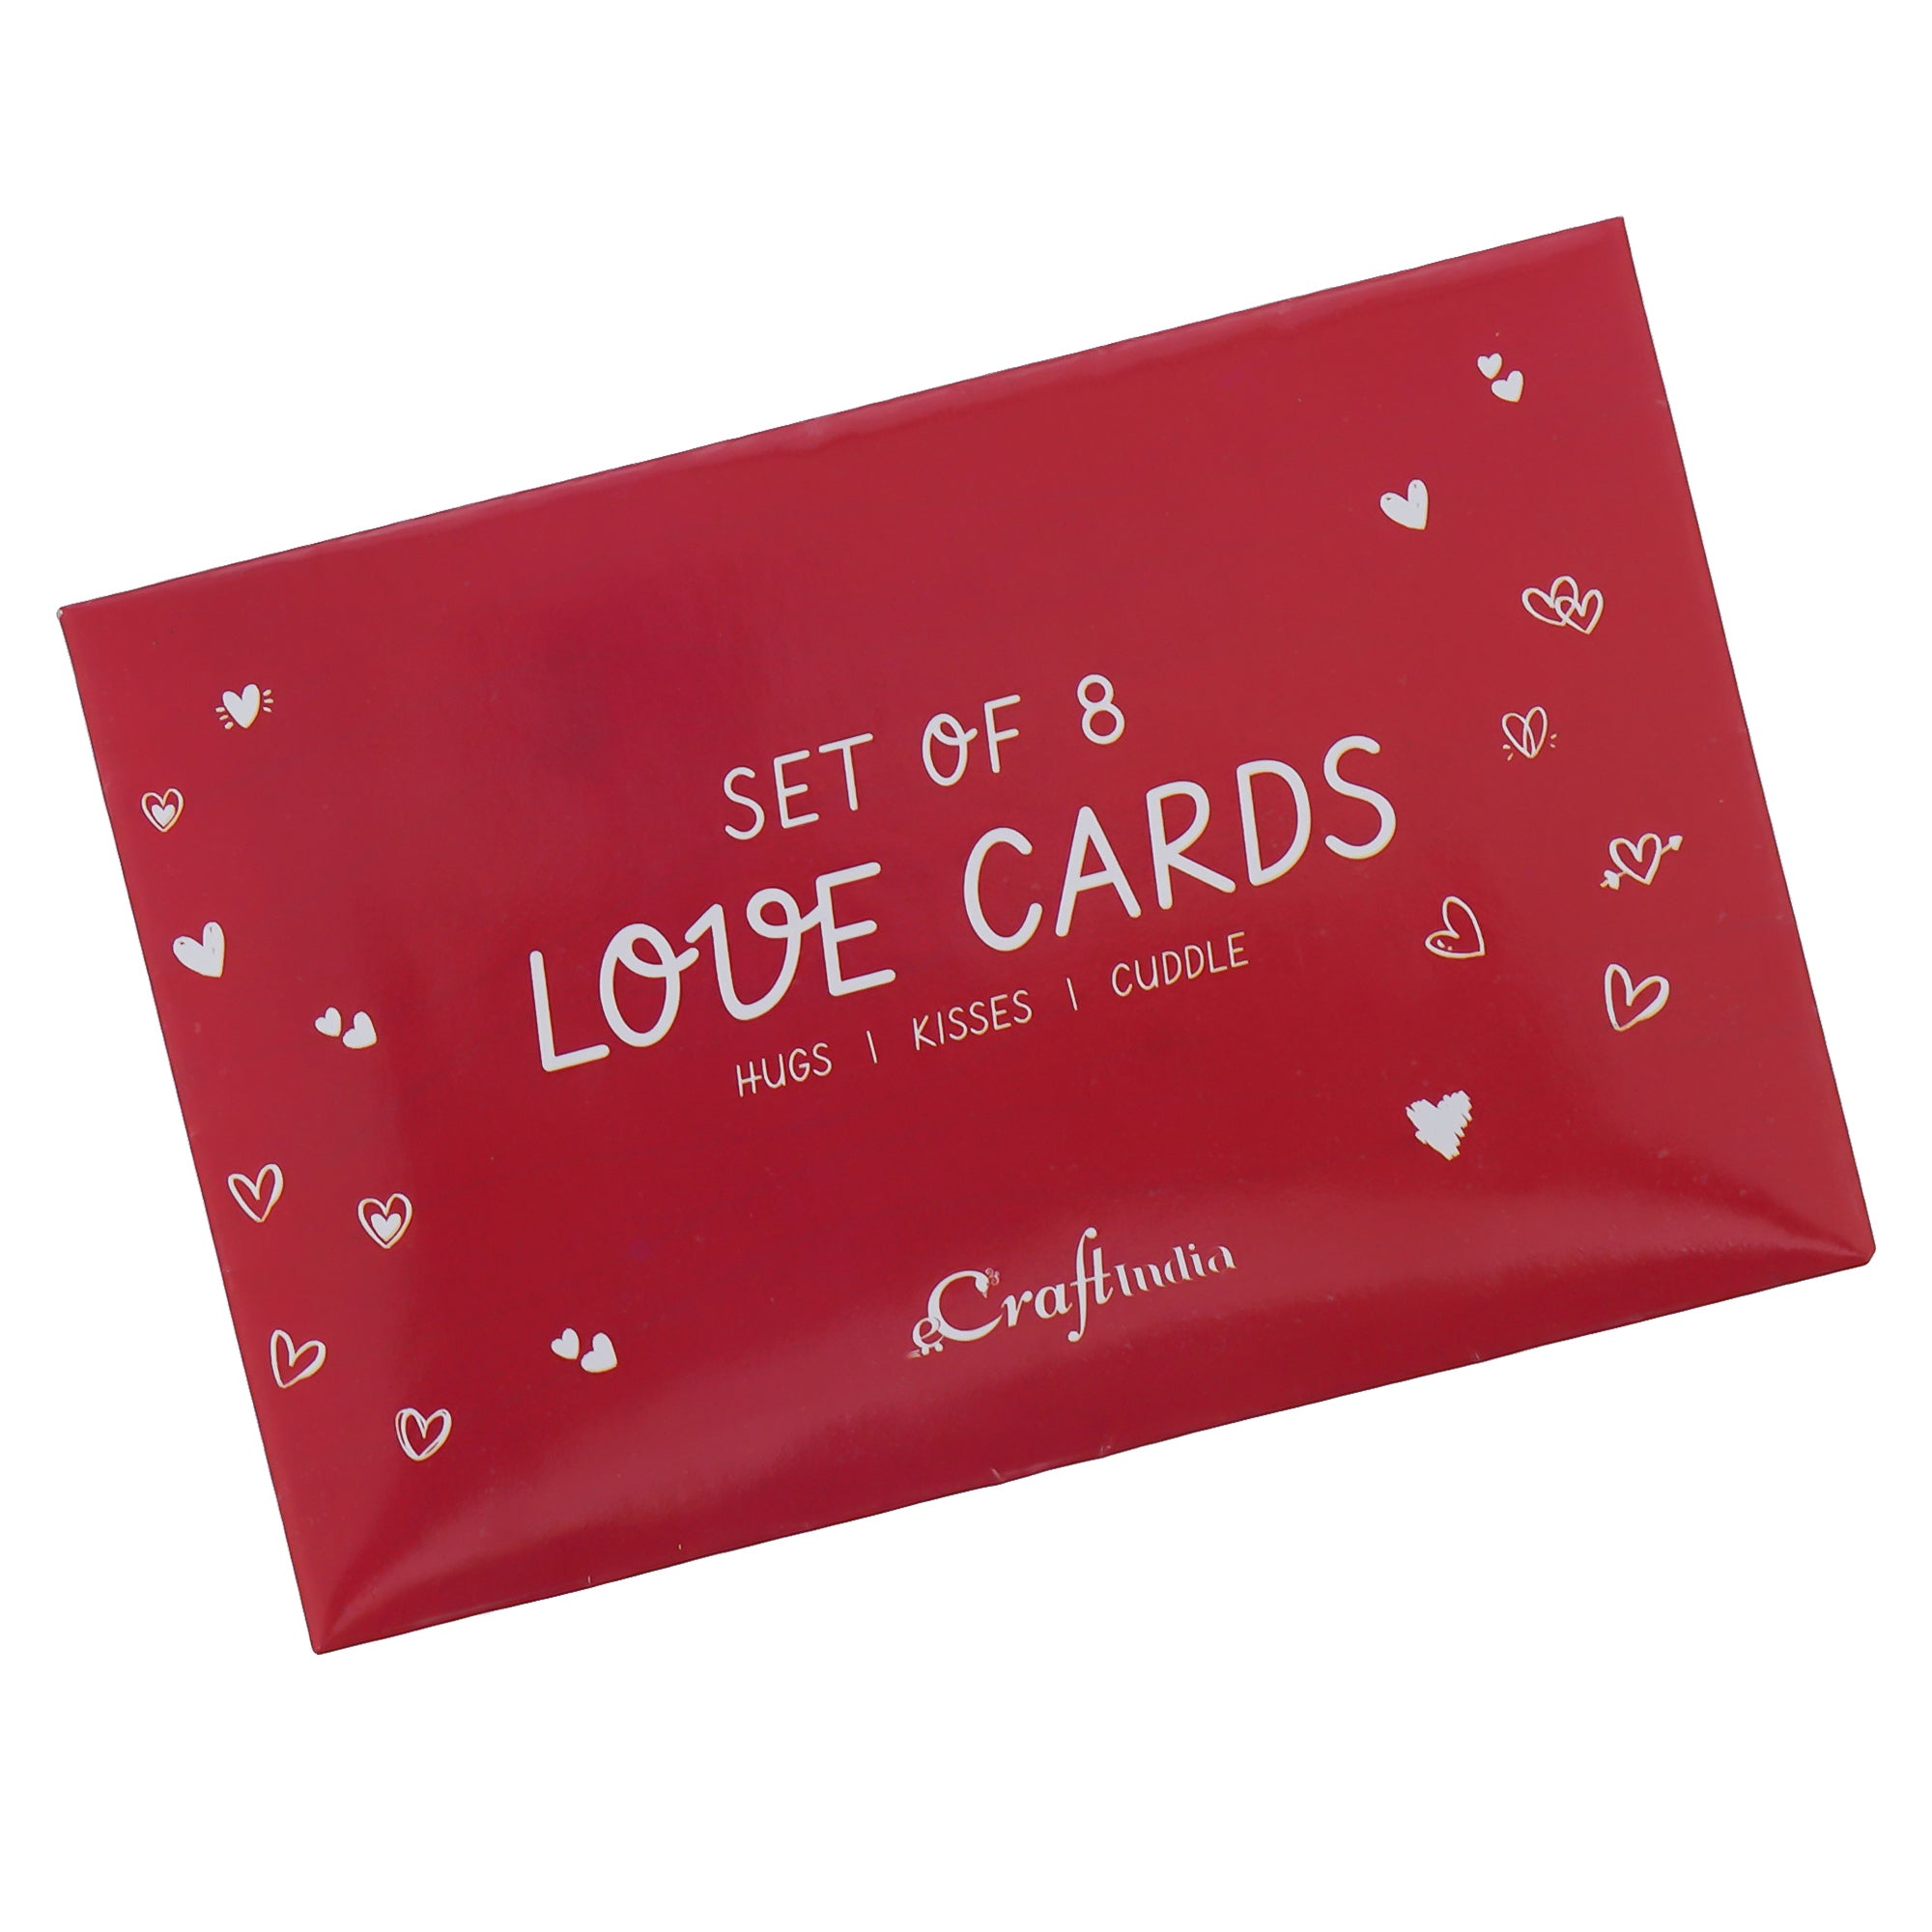 Valentine Combo of Pack of 8 Love Gift Cards, Red Gift Box with Teddy & Roses, Hands Showcasing Red Heart Gift Set 7